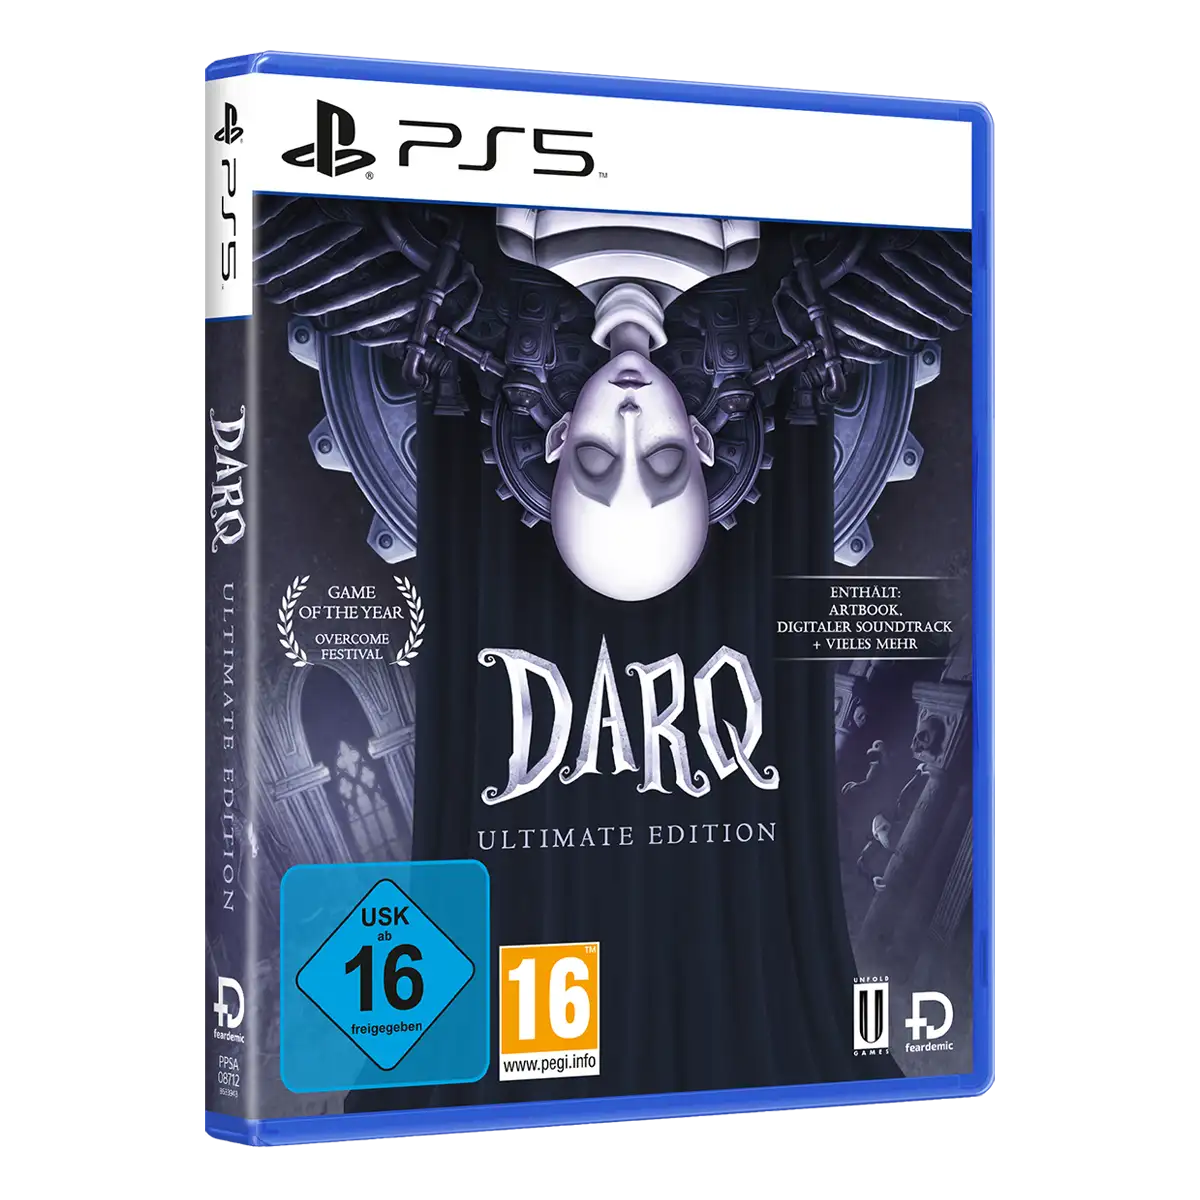 DARQ Ultimate Edition (PS5) Image 2